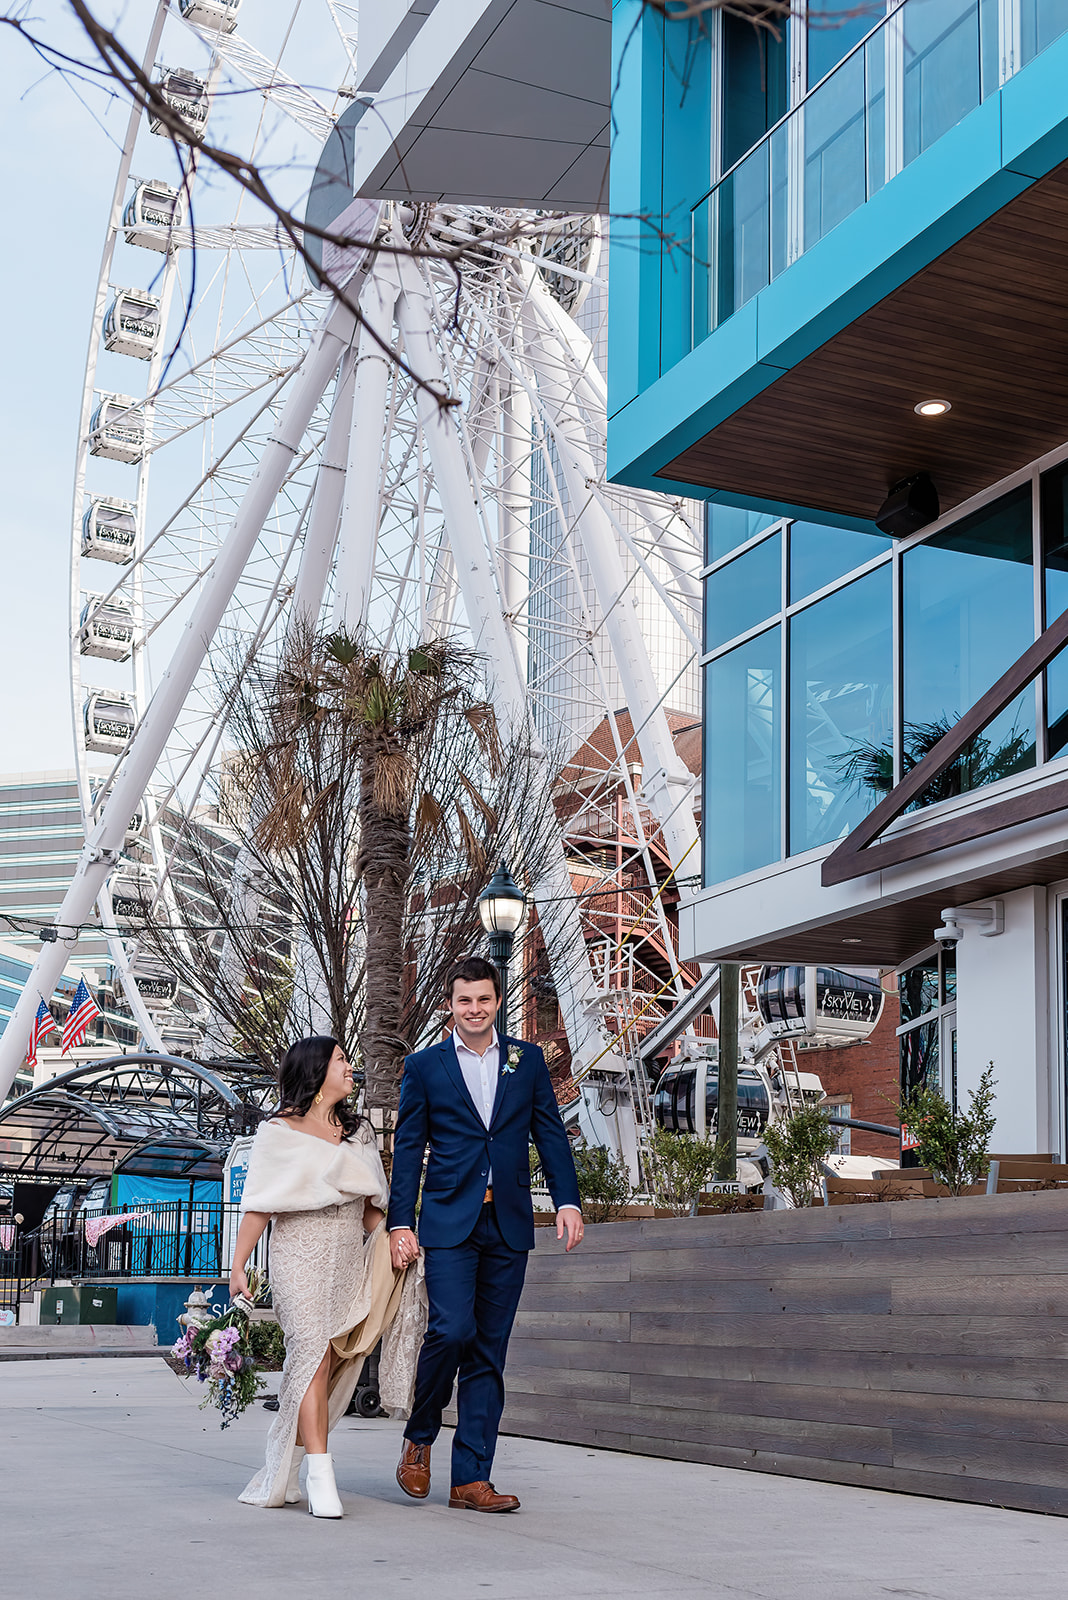 This is a picture of a Ferris wheel taken during an urban elopement. The bride and groom are standing in front of it.